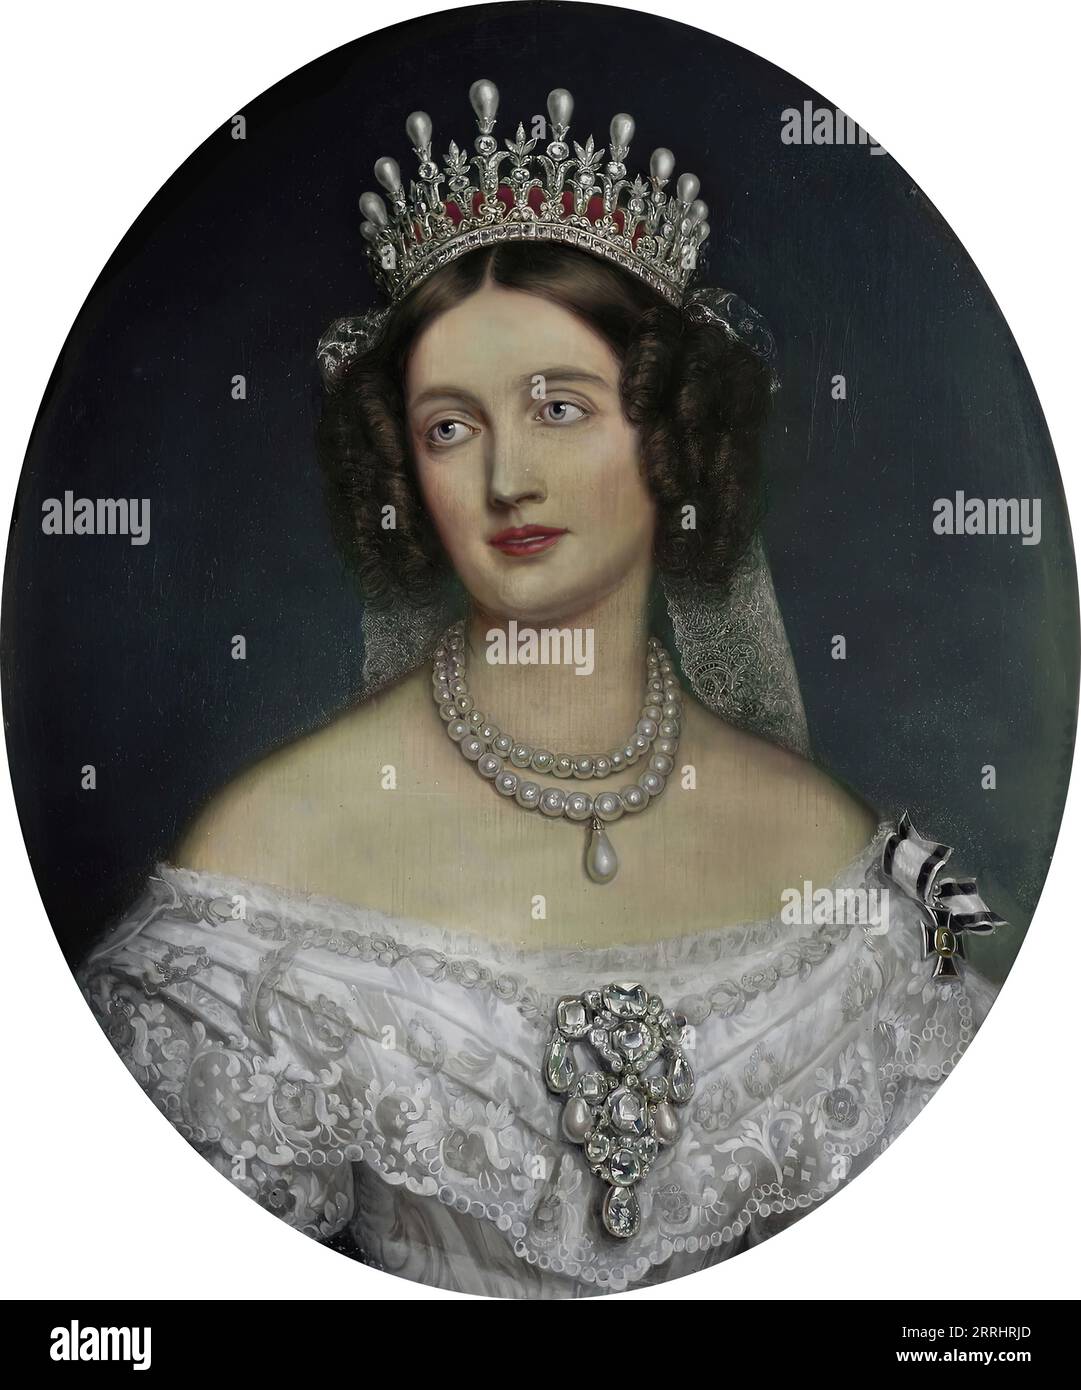 Elizabeth (1801-1873), Queen of Prussia, born Princess of Bavaria, married to King Frederick William IV, early-mid 19th century. Stock Photo